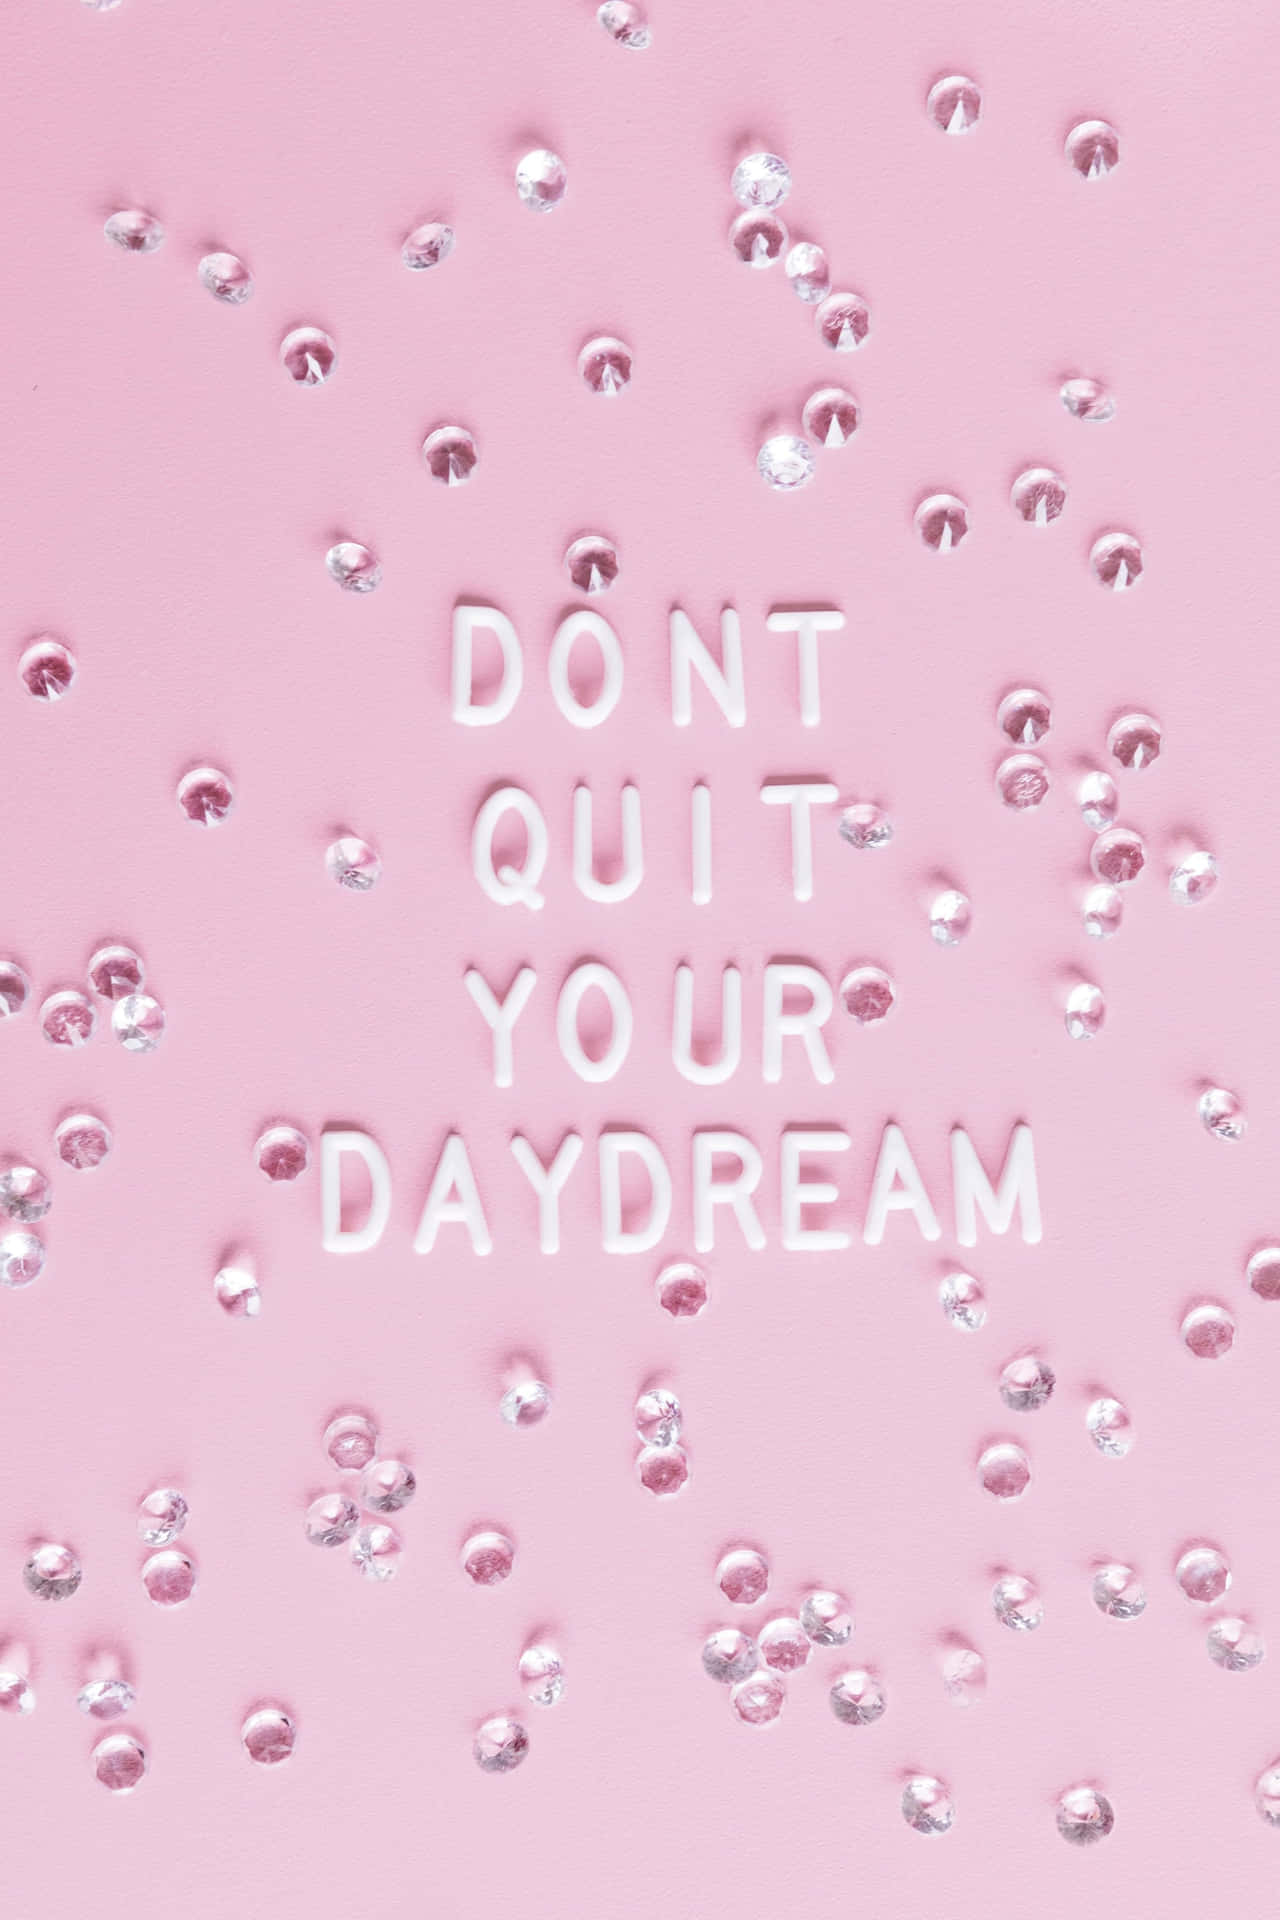 Don't Quit Your Daydream - Ad Wallpaper